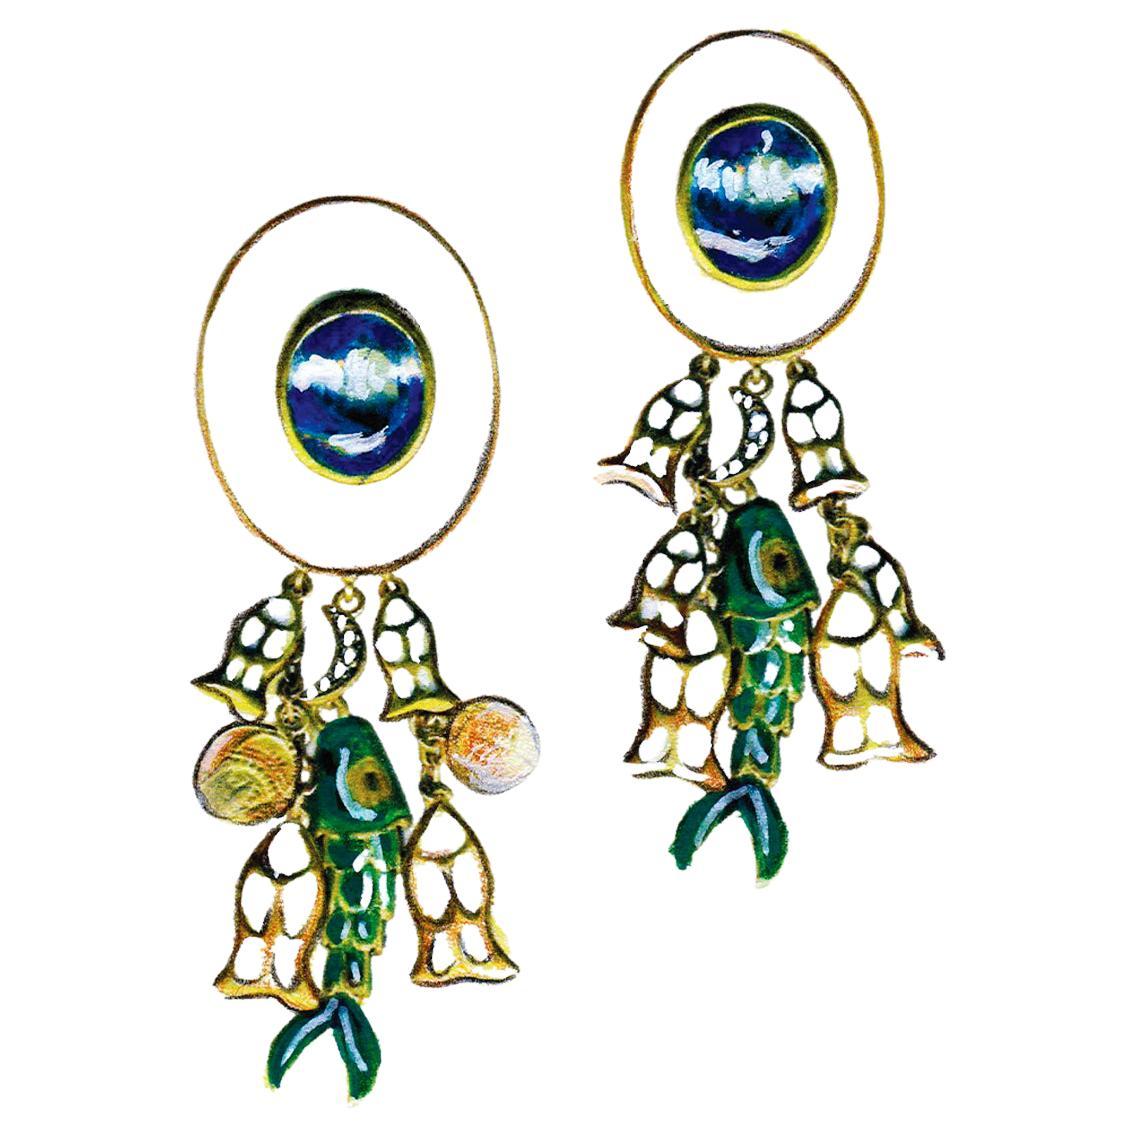 21st Century Diamonds Blue Topaz Fish White Green Enamel Yellow Gold Earrings 

MADE TO ORDER

18 Karat Gold Earrings  Diamonds Blue Topaz Enamel

18 Karat Gold Earrings Omega back with Blue Topaz, white Enamel, fishes.

Introducing our exquisite 18